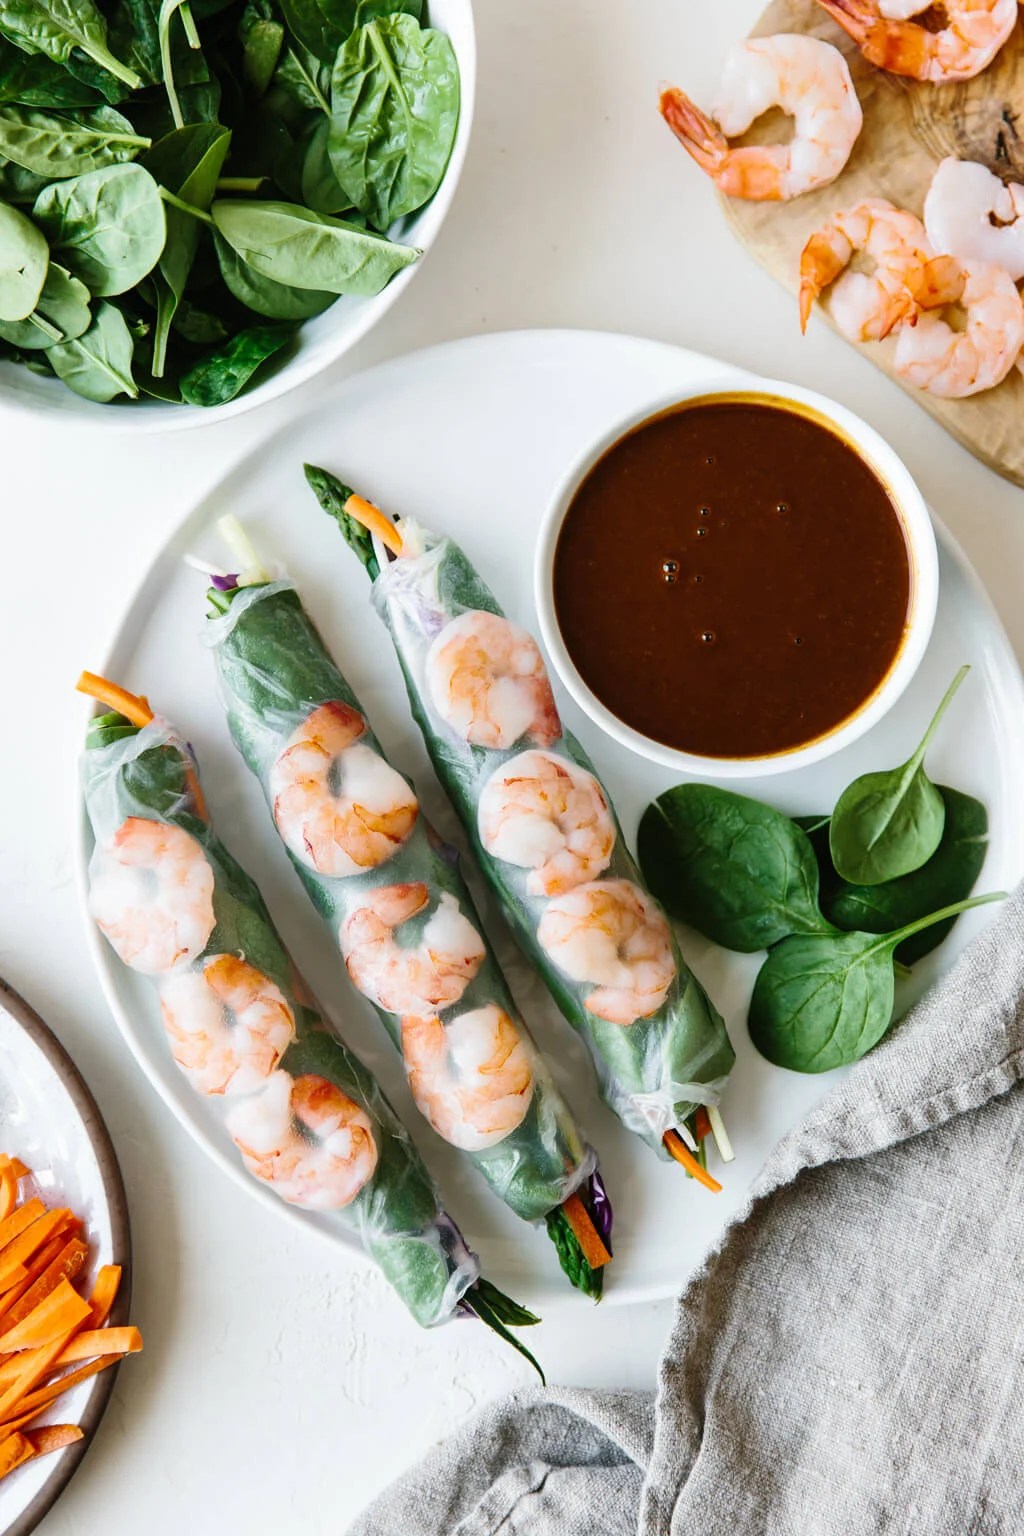 Vietnamese spring rolls filled with shrimp, spinach and vegetables and served with an almond butter dipping sauce. They're the perfect light and healthy recipe.